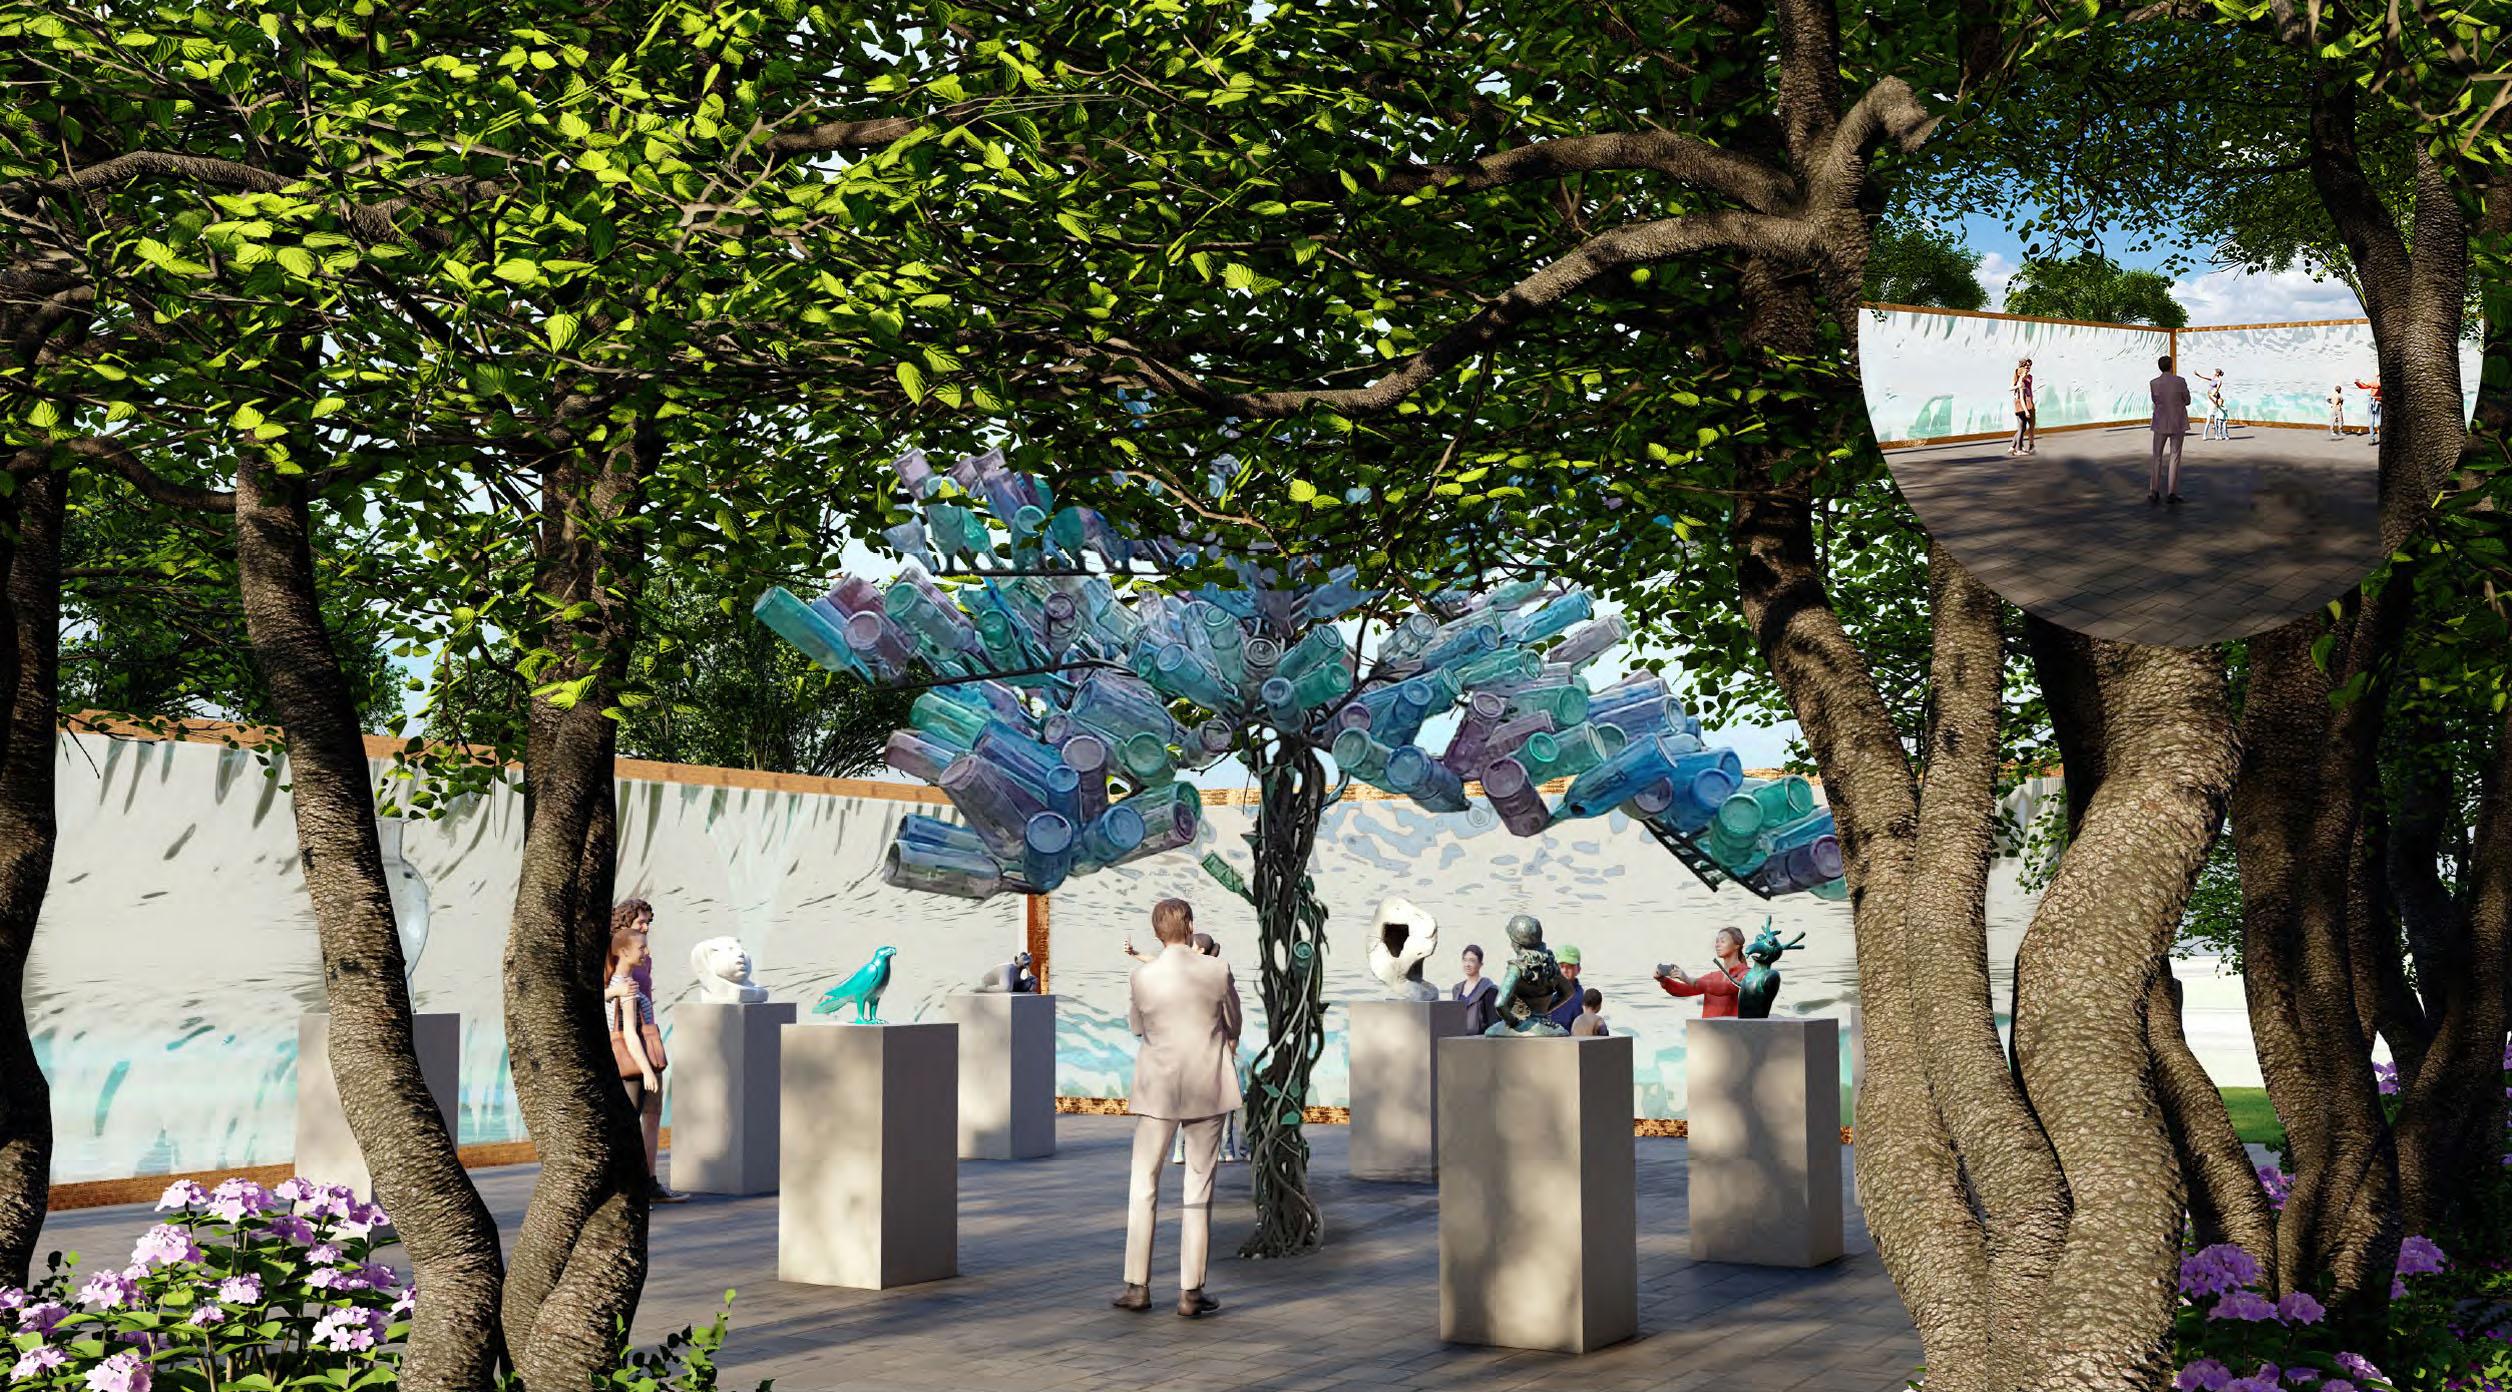 Plastic bottle trees represent sculptural art exhibits in an outdoor space bordered by a water wall.